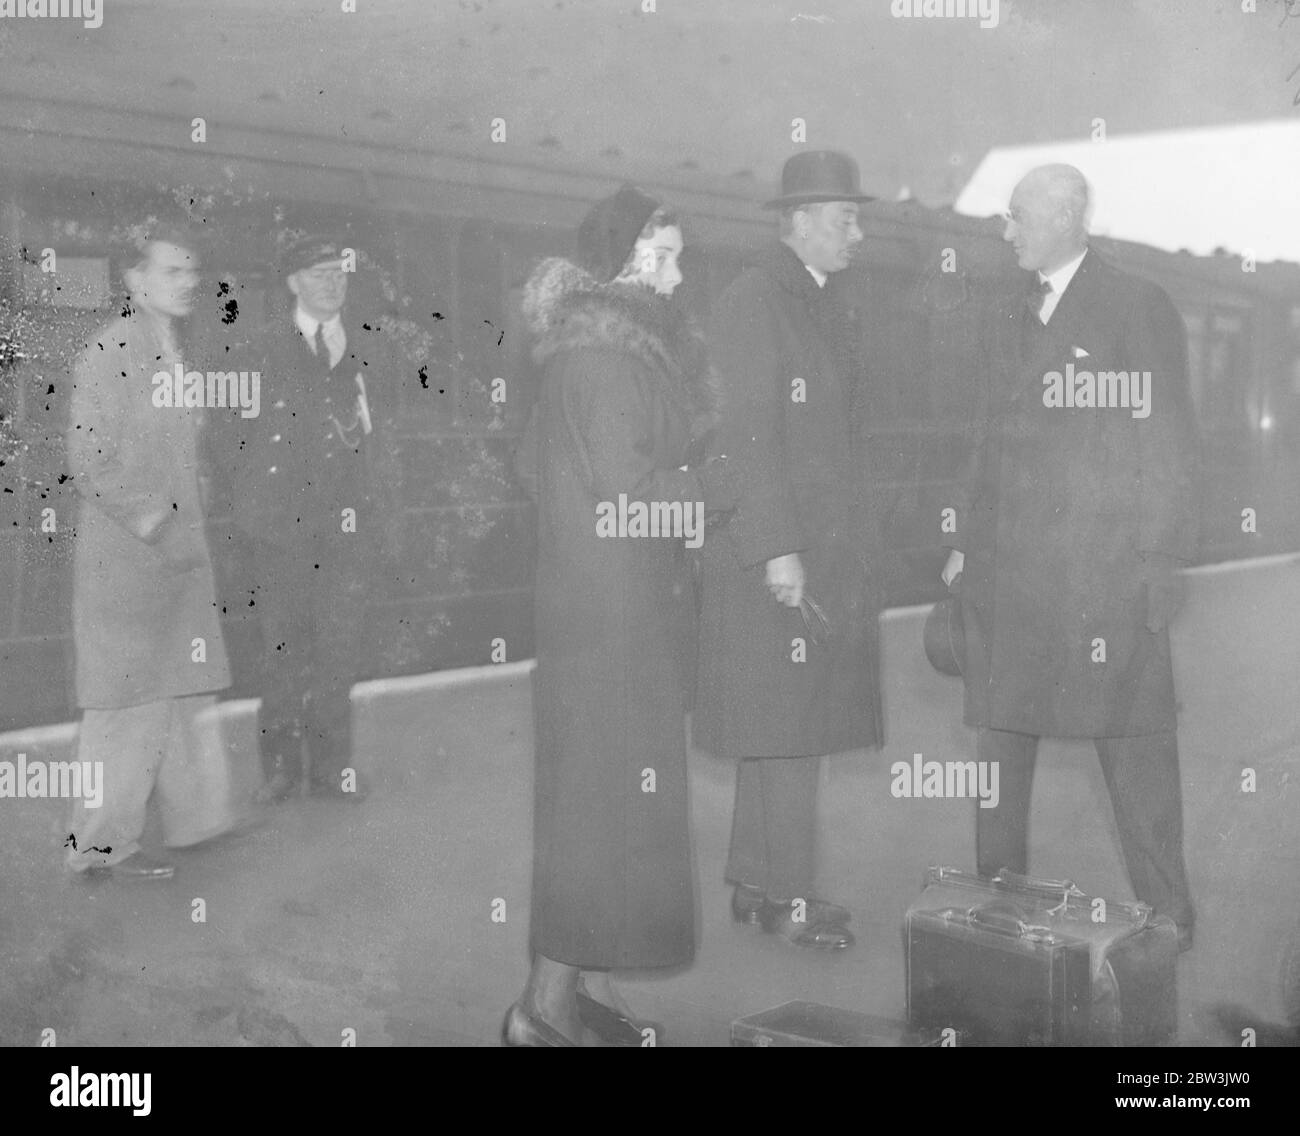 Duke of Gloucester and Lady Alice Scott return to London together after Duke of Buccleuch 's funeral . The Duke of Gloucester and Lady Alice Scott on arrival at St Pancras . 23 October 1935 Stock Photo